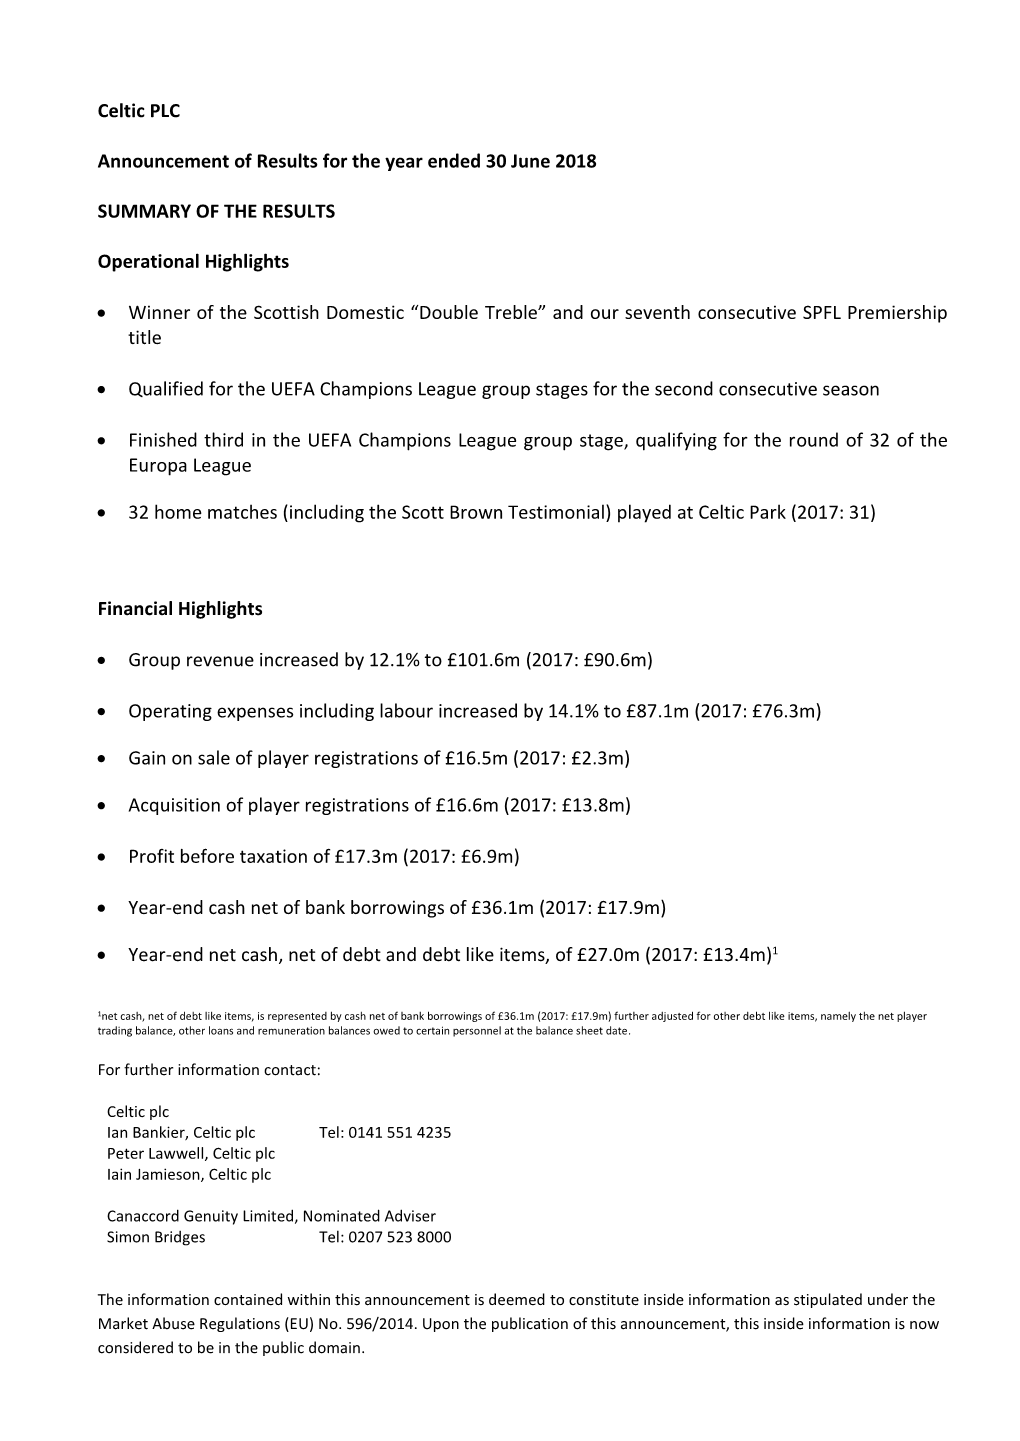 Celtic PLC Announcement of Results for the Year Ended 30 June 2018